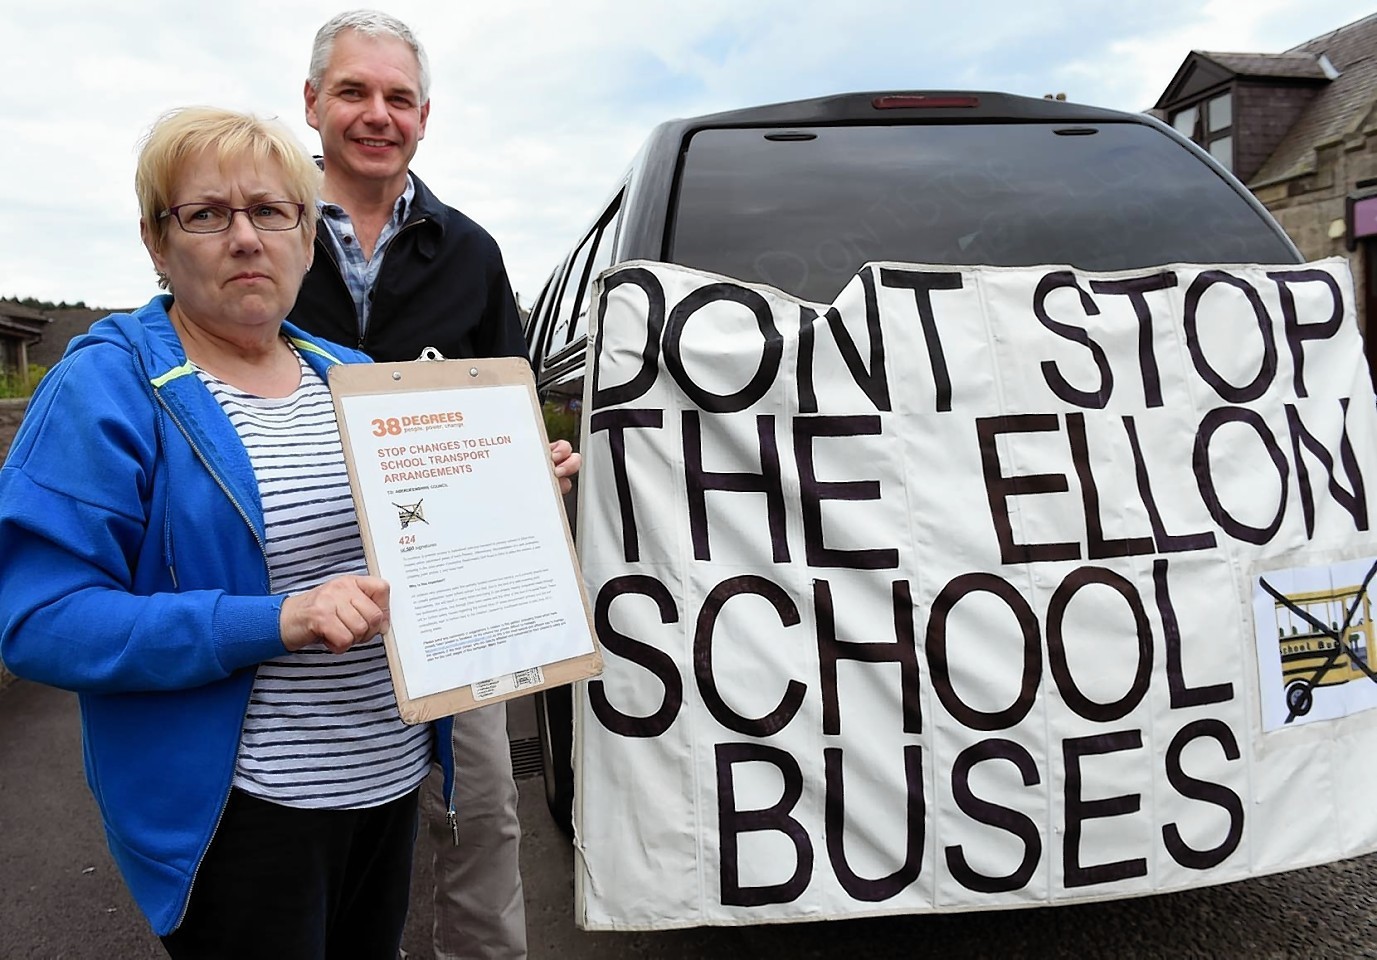 Parents are furious at the move to axe the part-subsided school bus service in Ellon